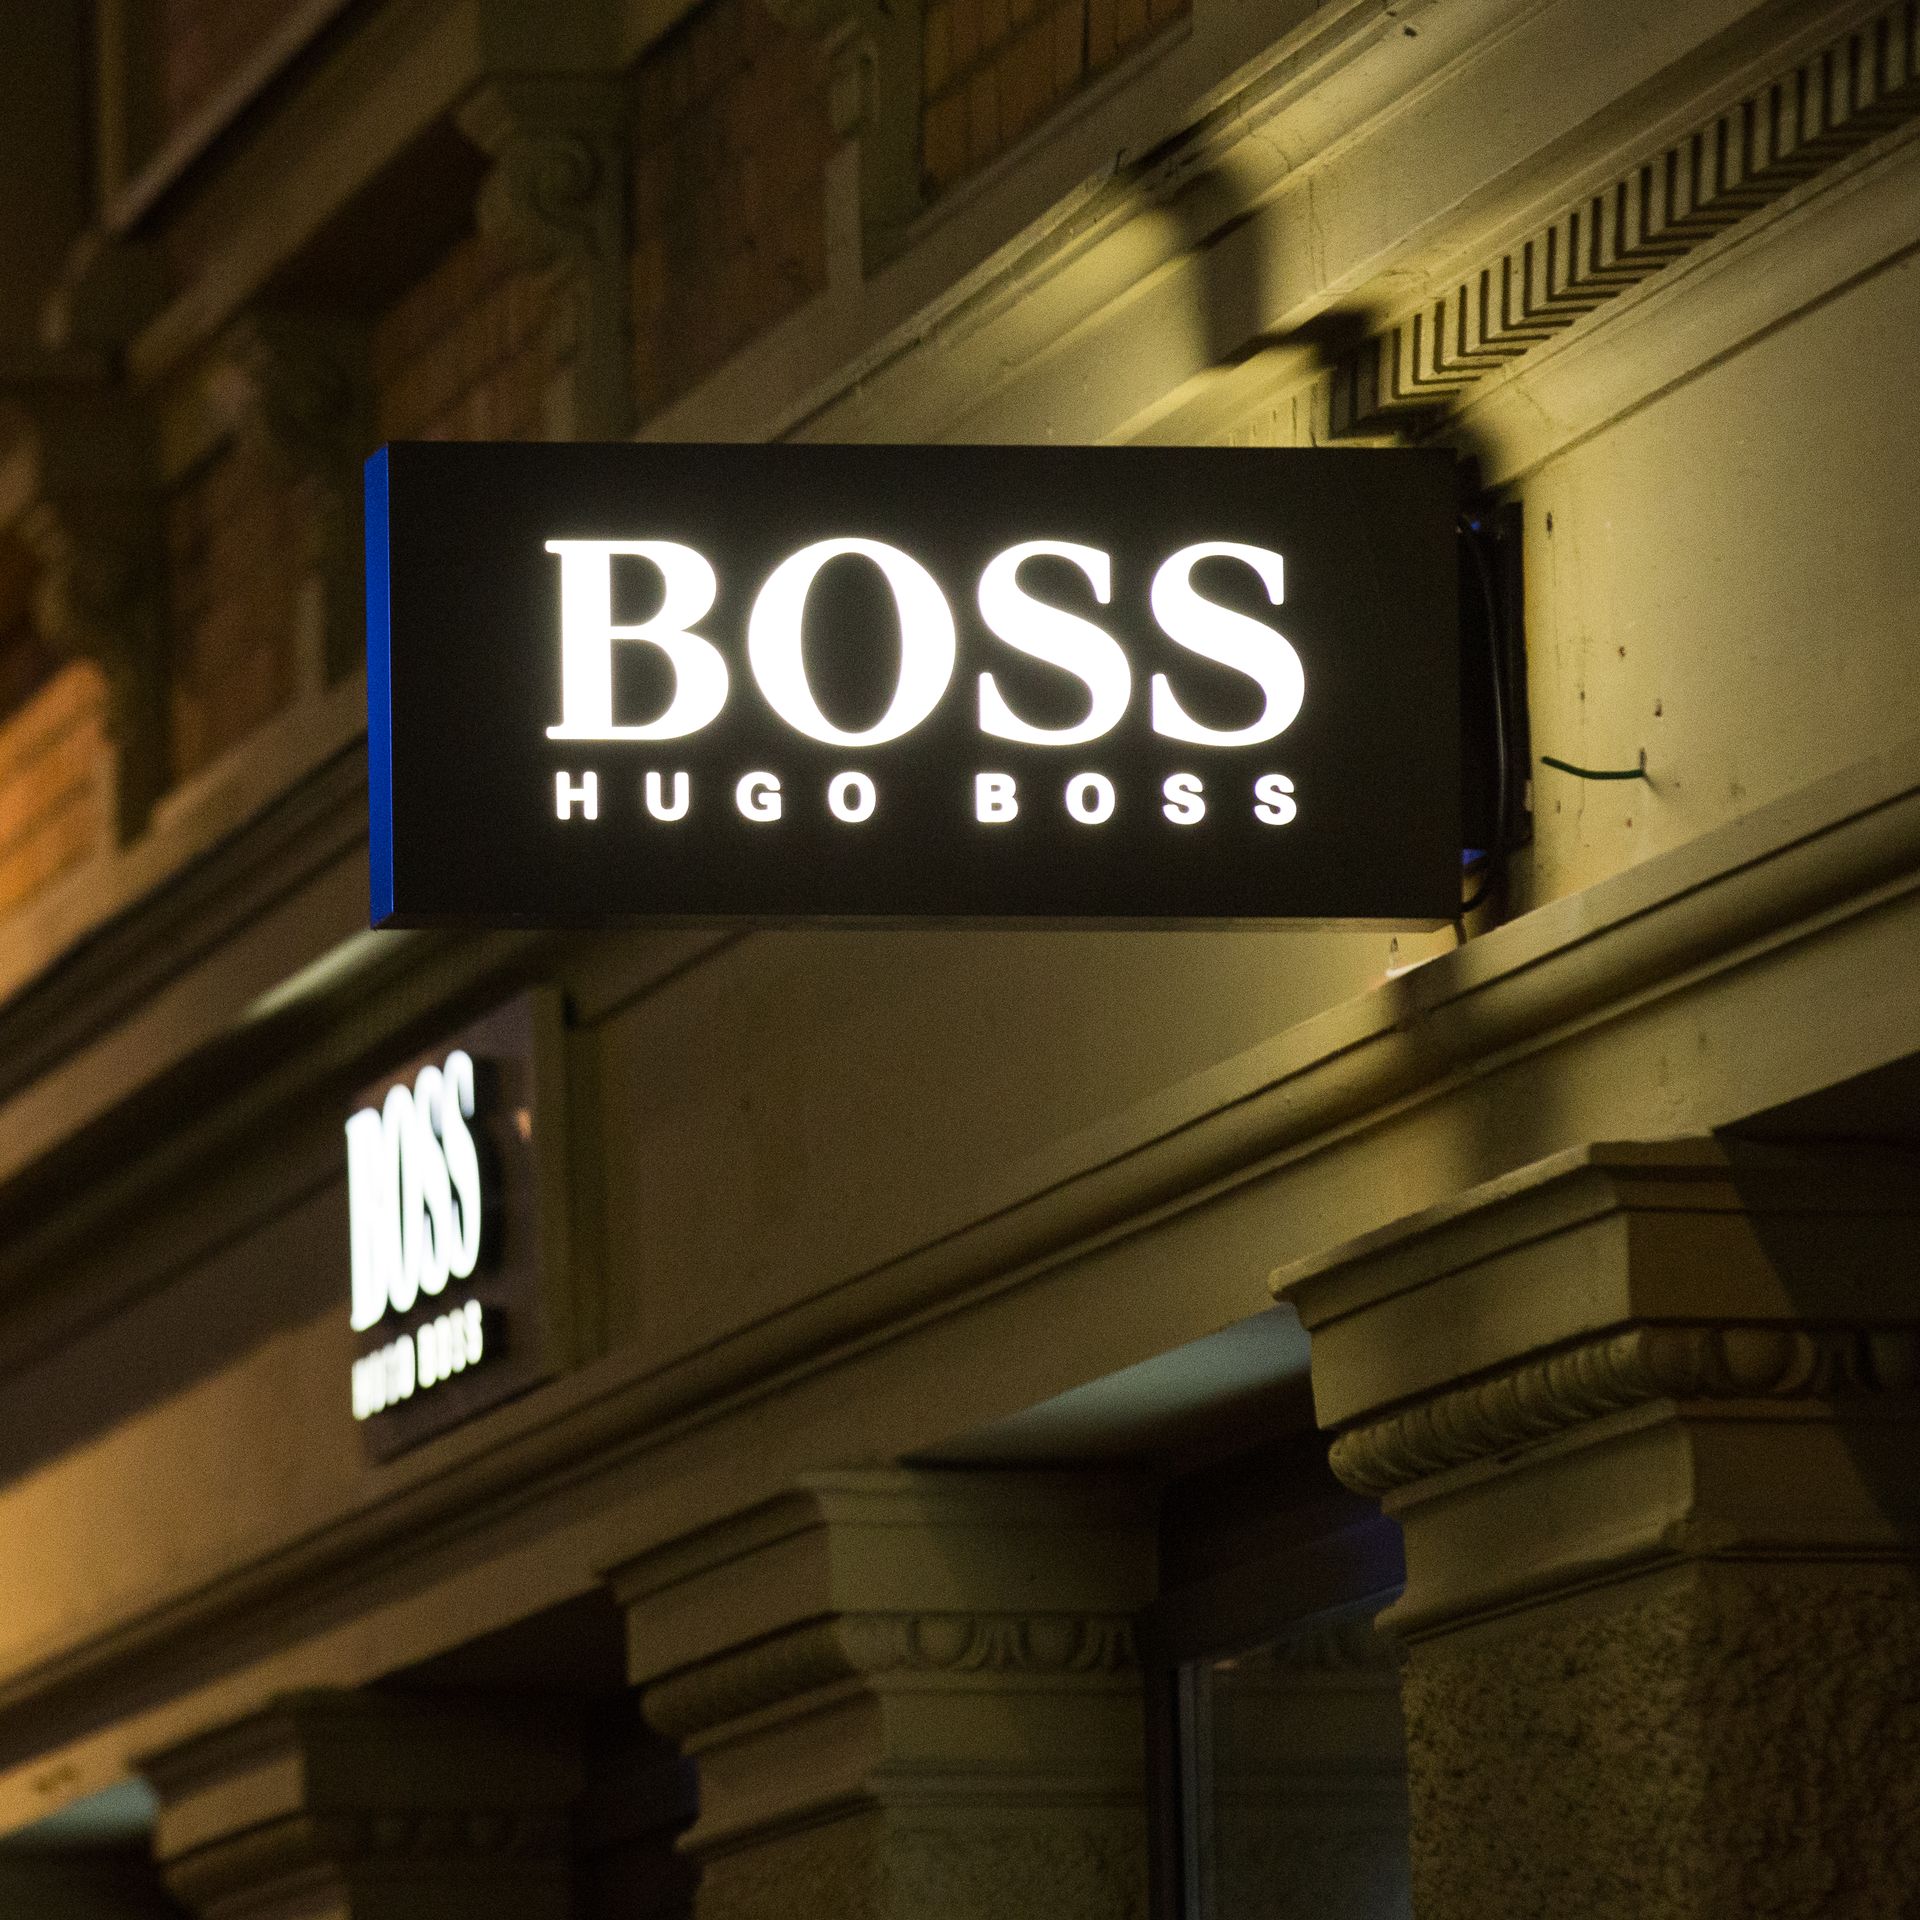 A lighted Hugo Boss sign hangs above a storefront.